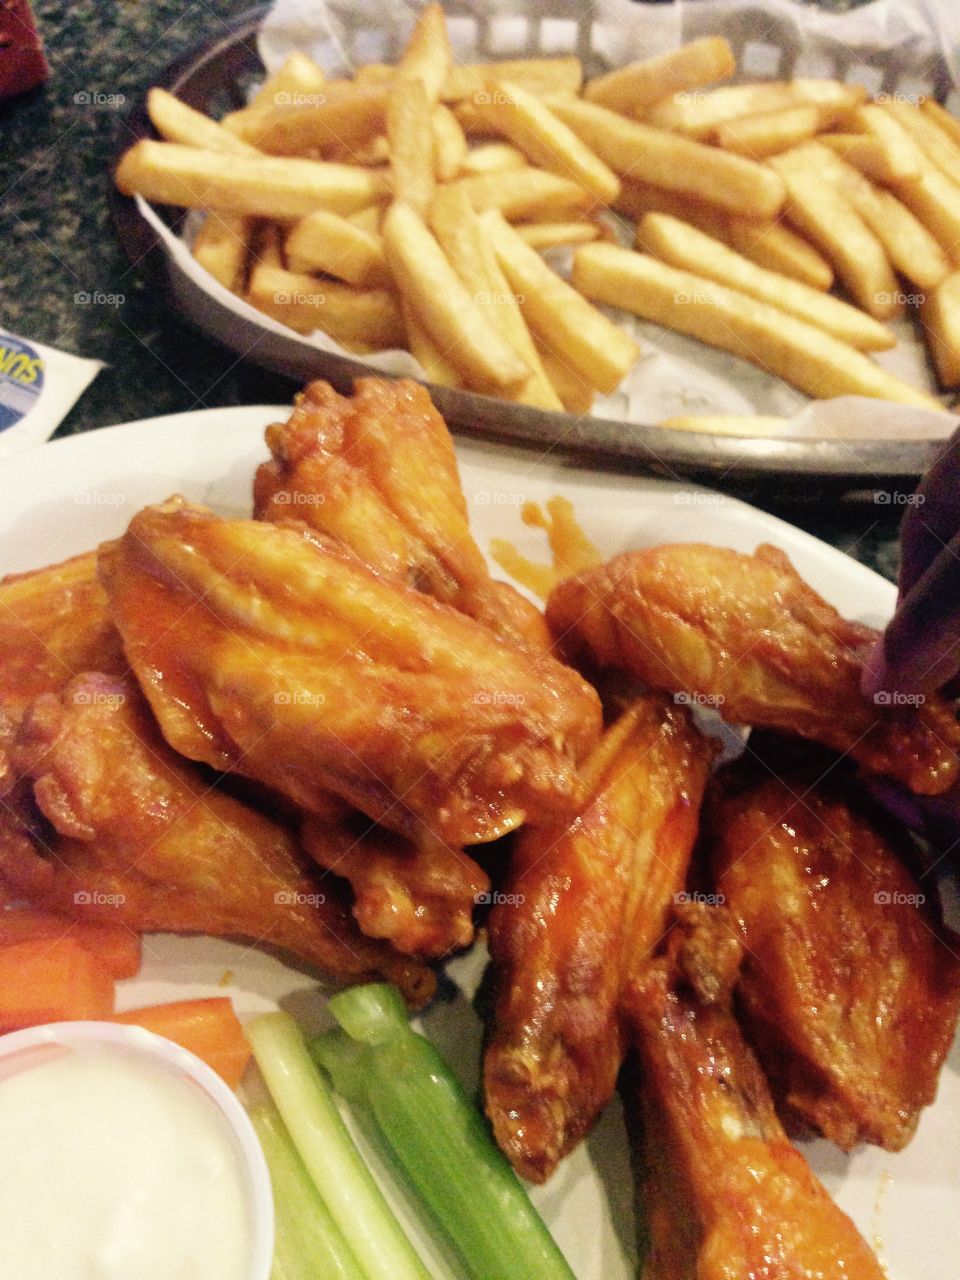 Wings & french fries